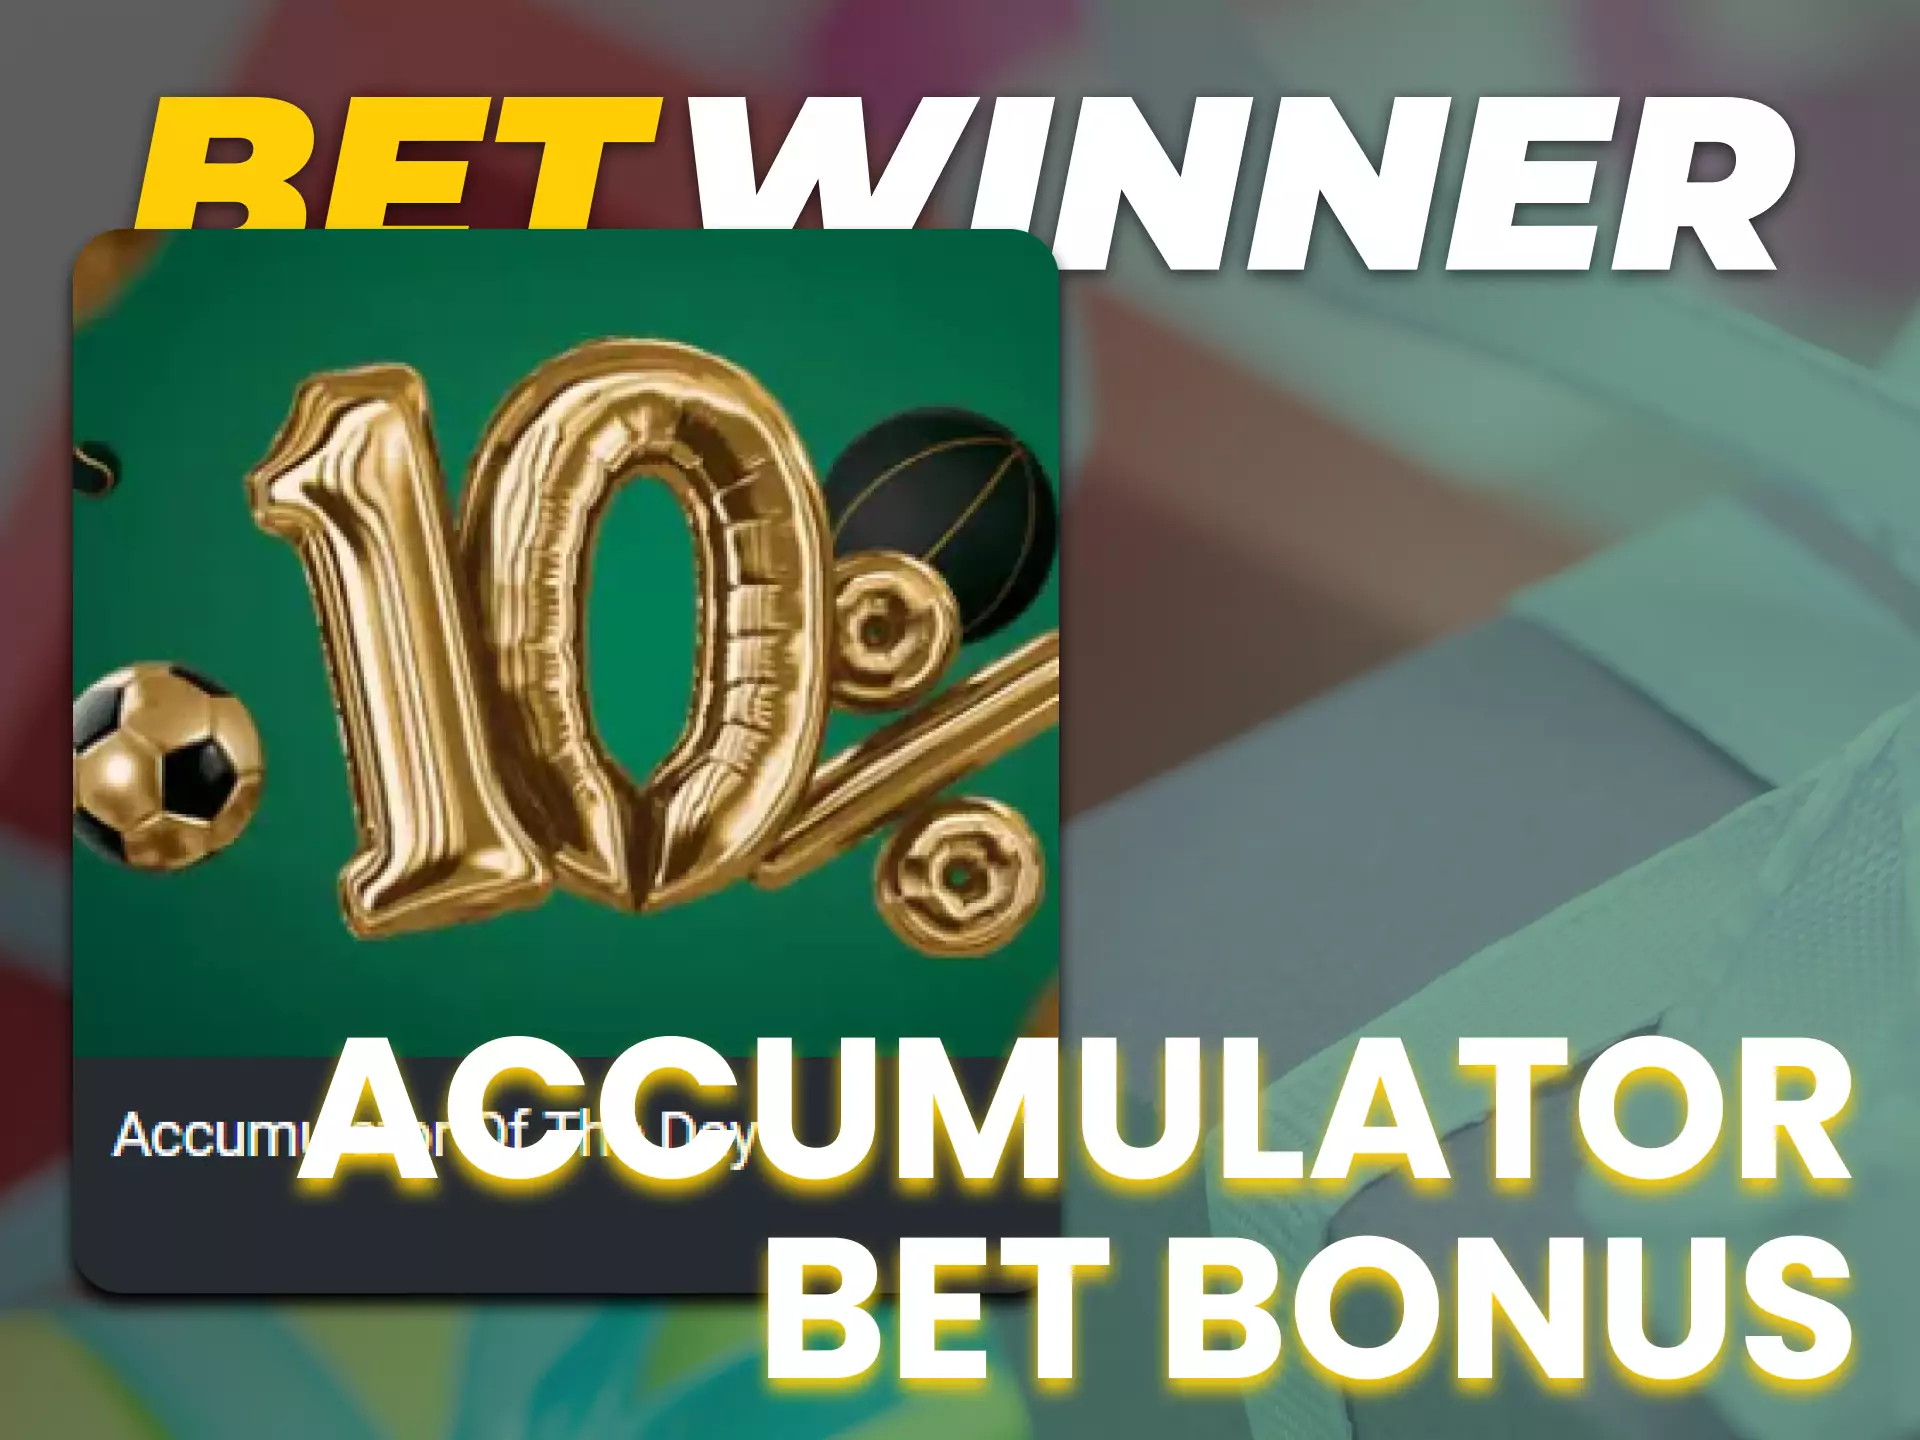 In the Betwinner app you will get a bonus accumulator on bets.